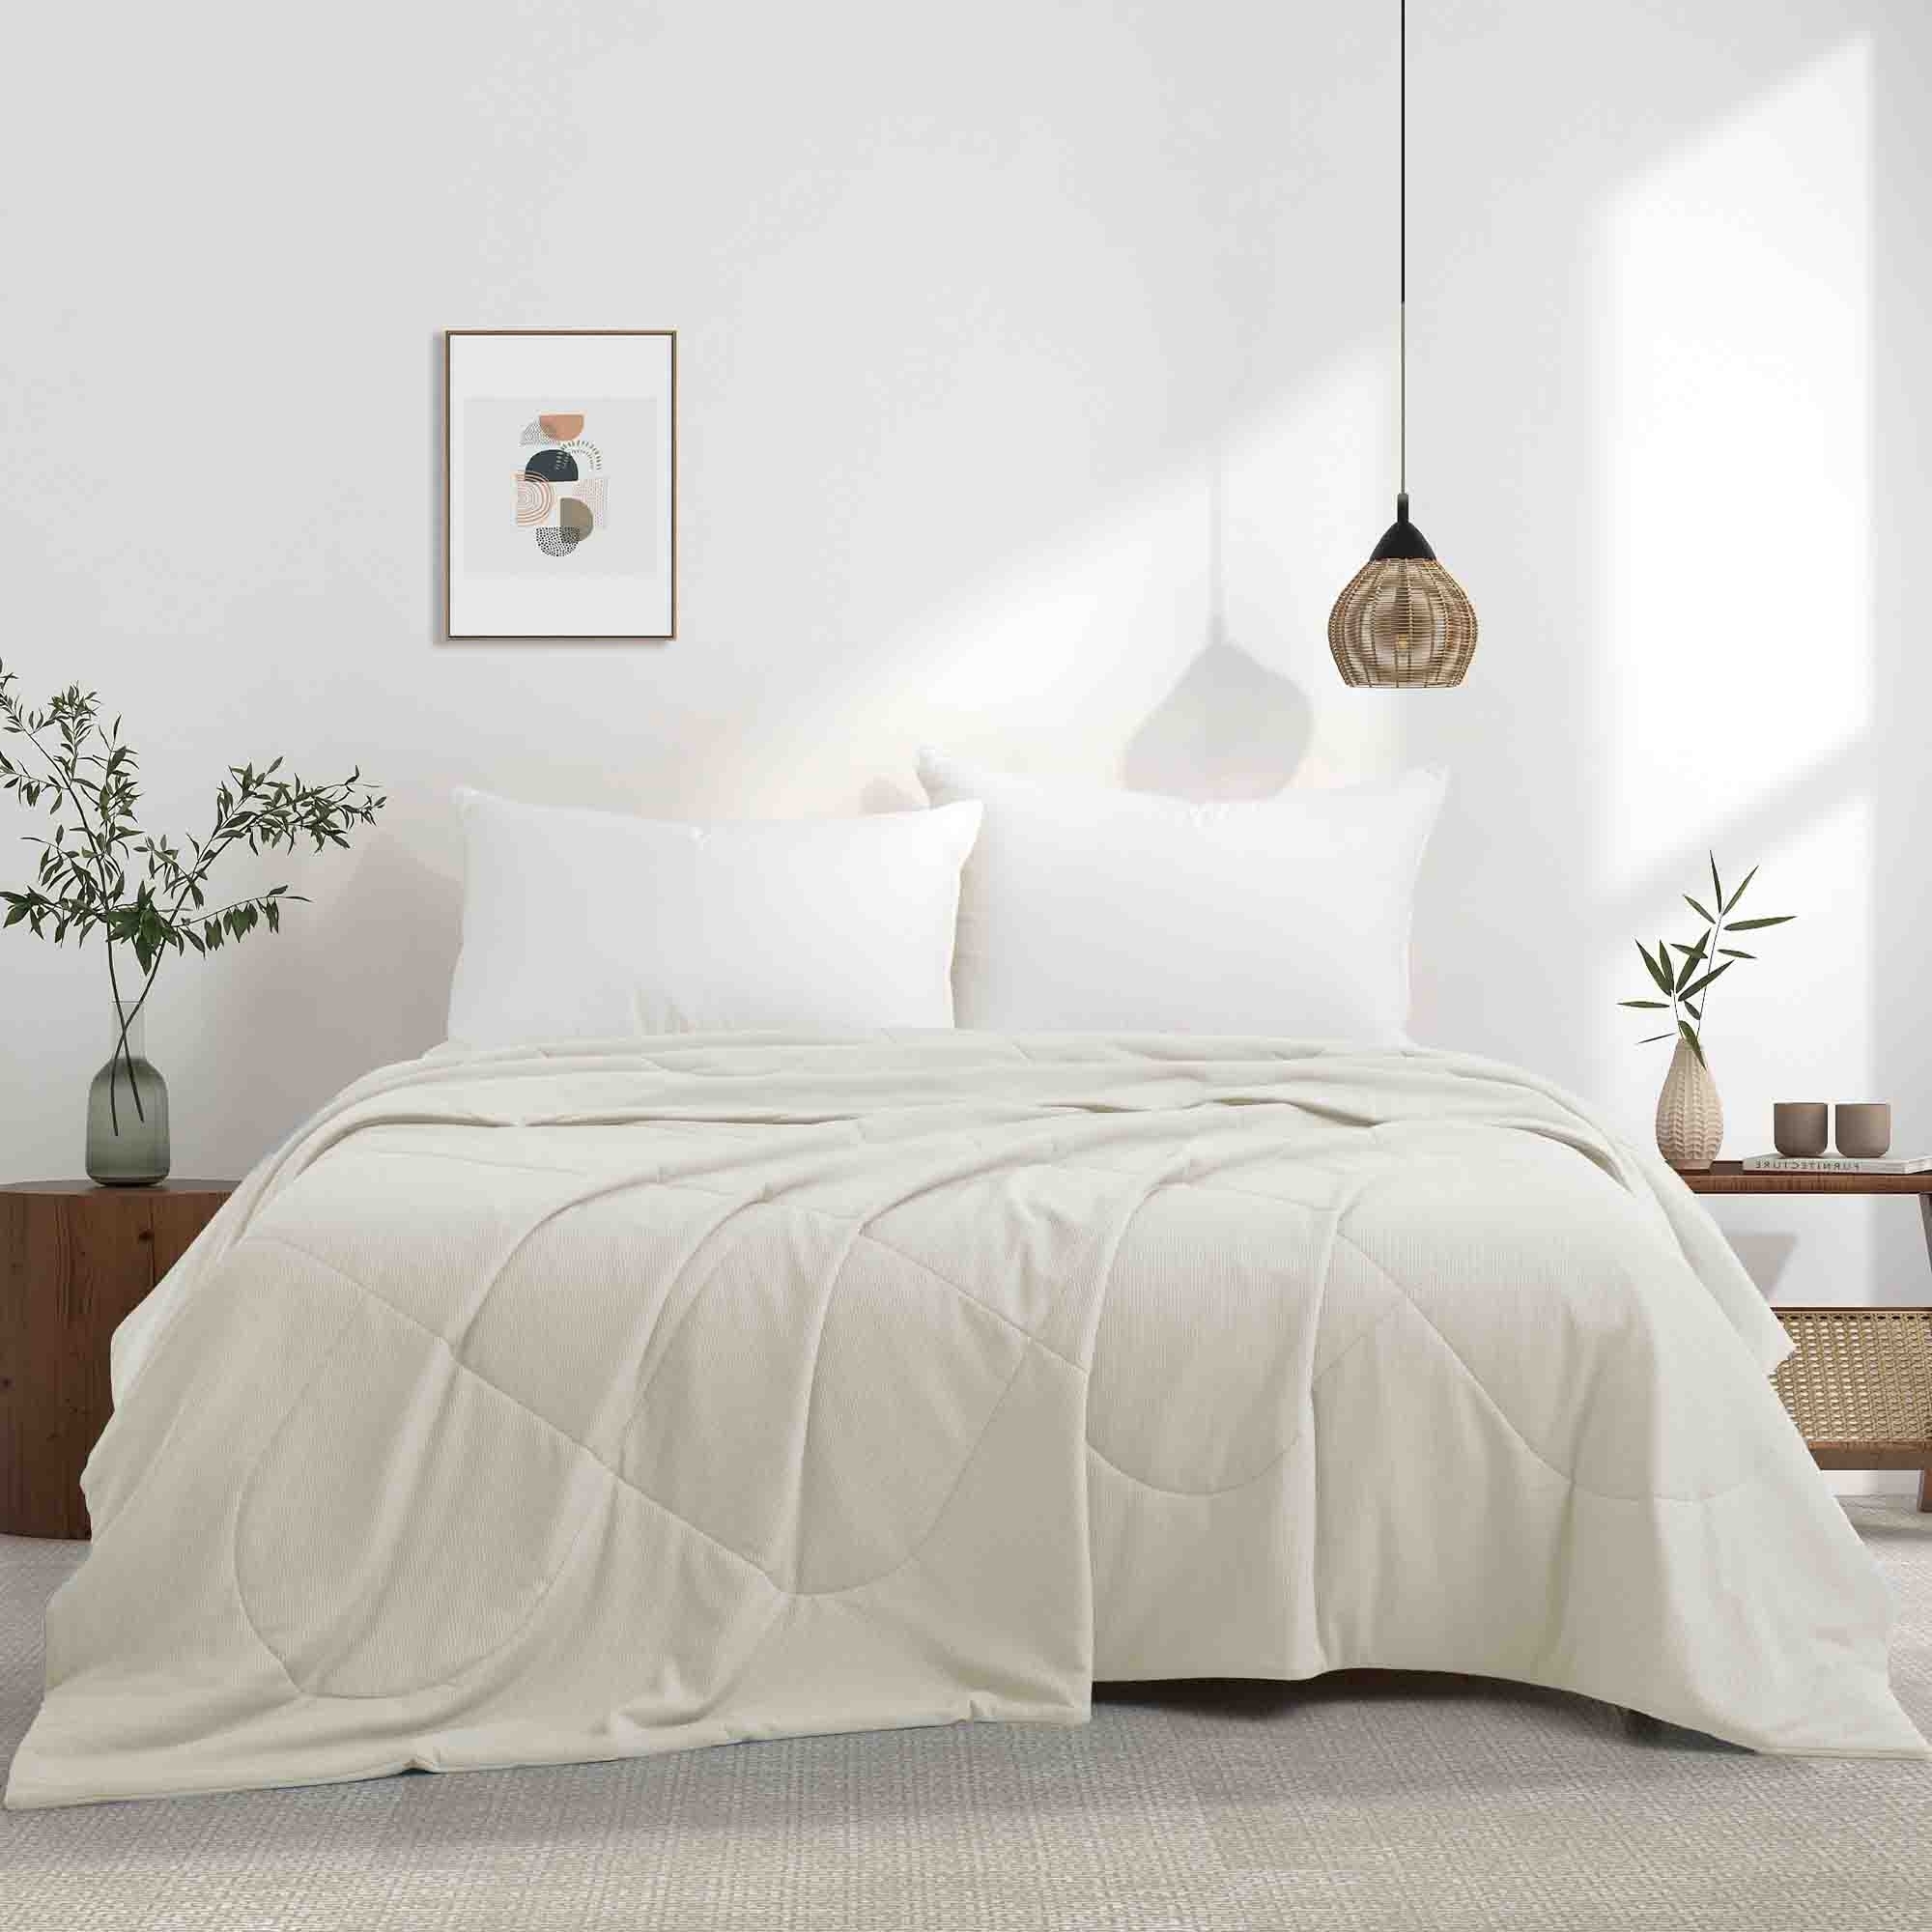 Reversible Silky Oversize Blanket With Waffle Design Bed Blanket - Cream, Twin